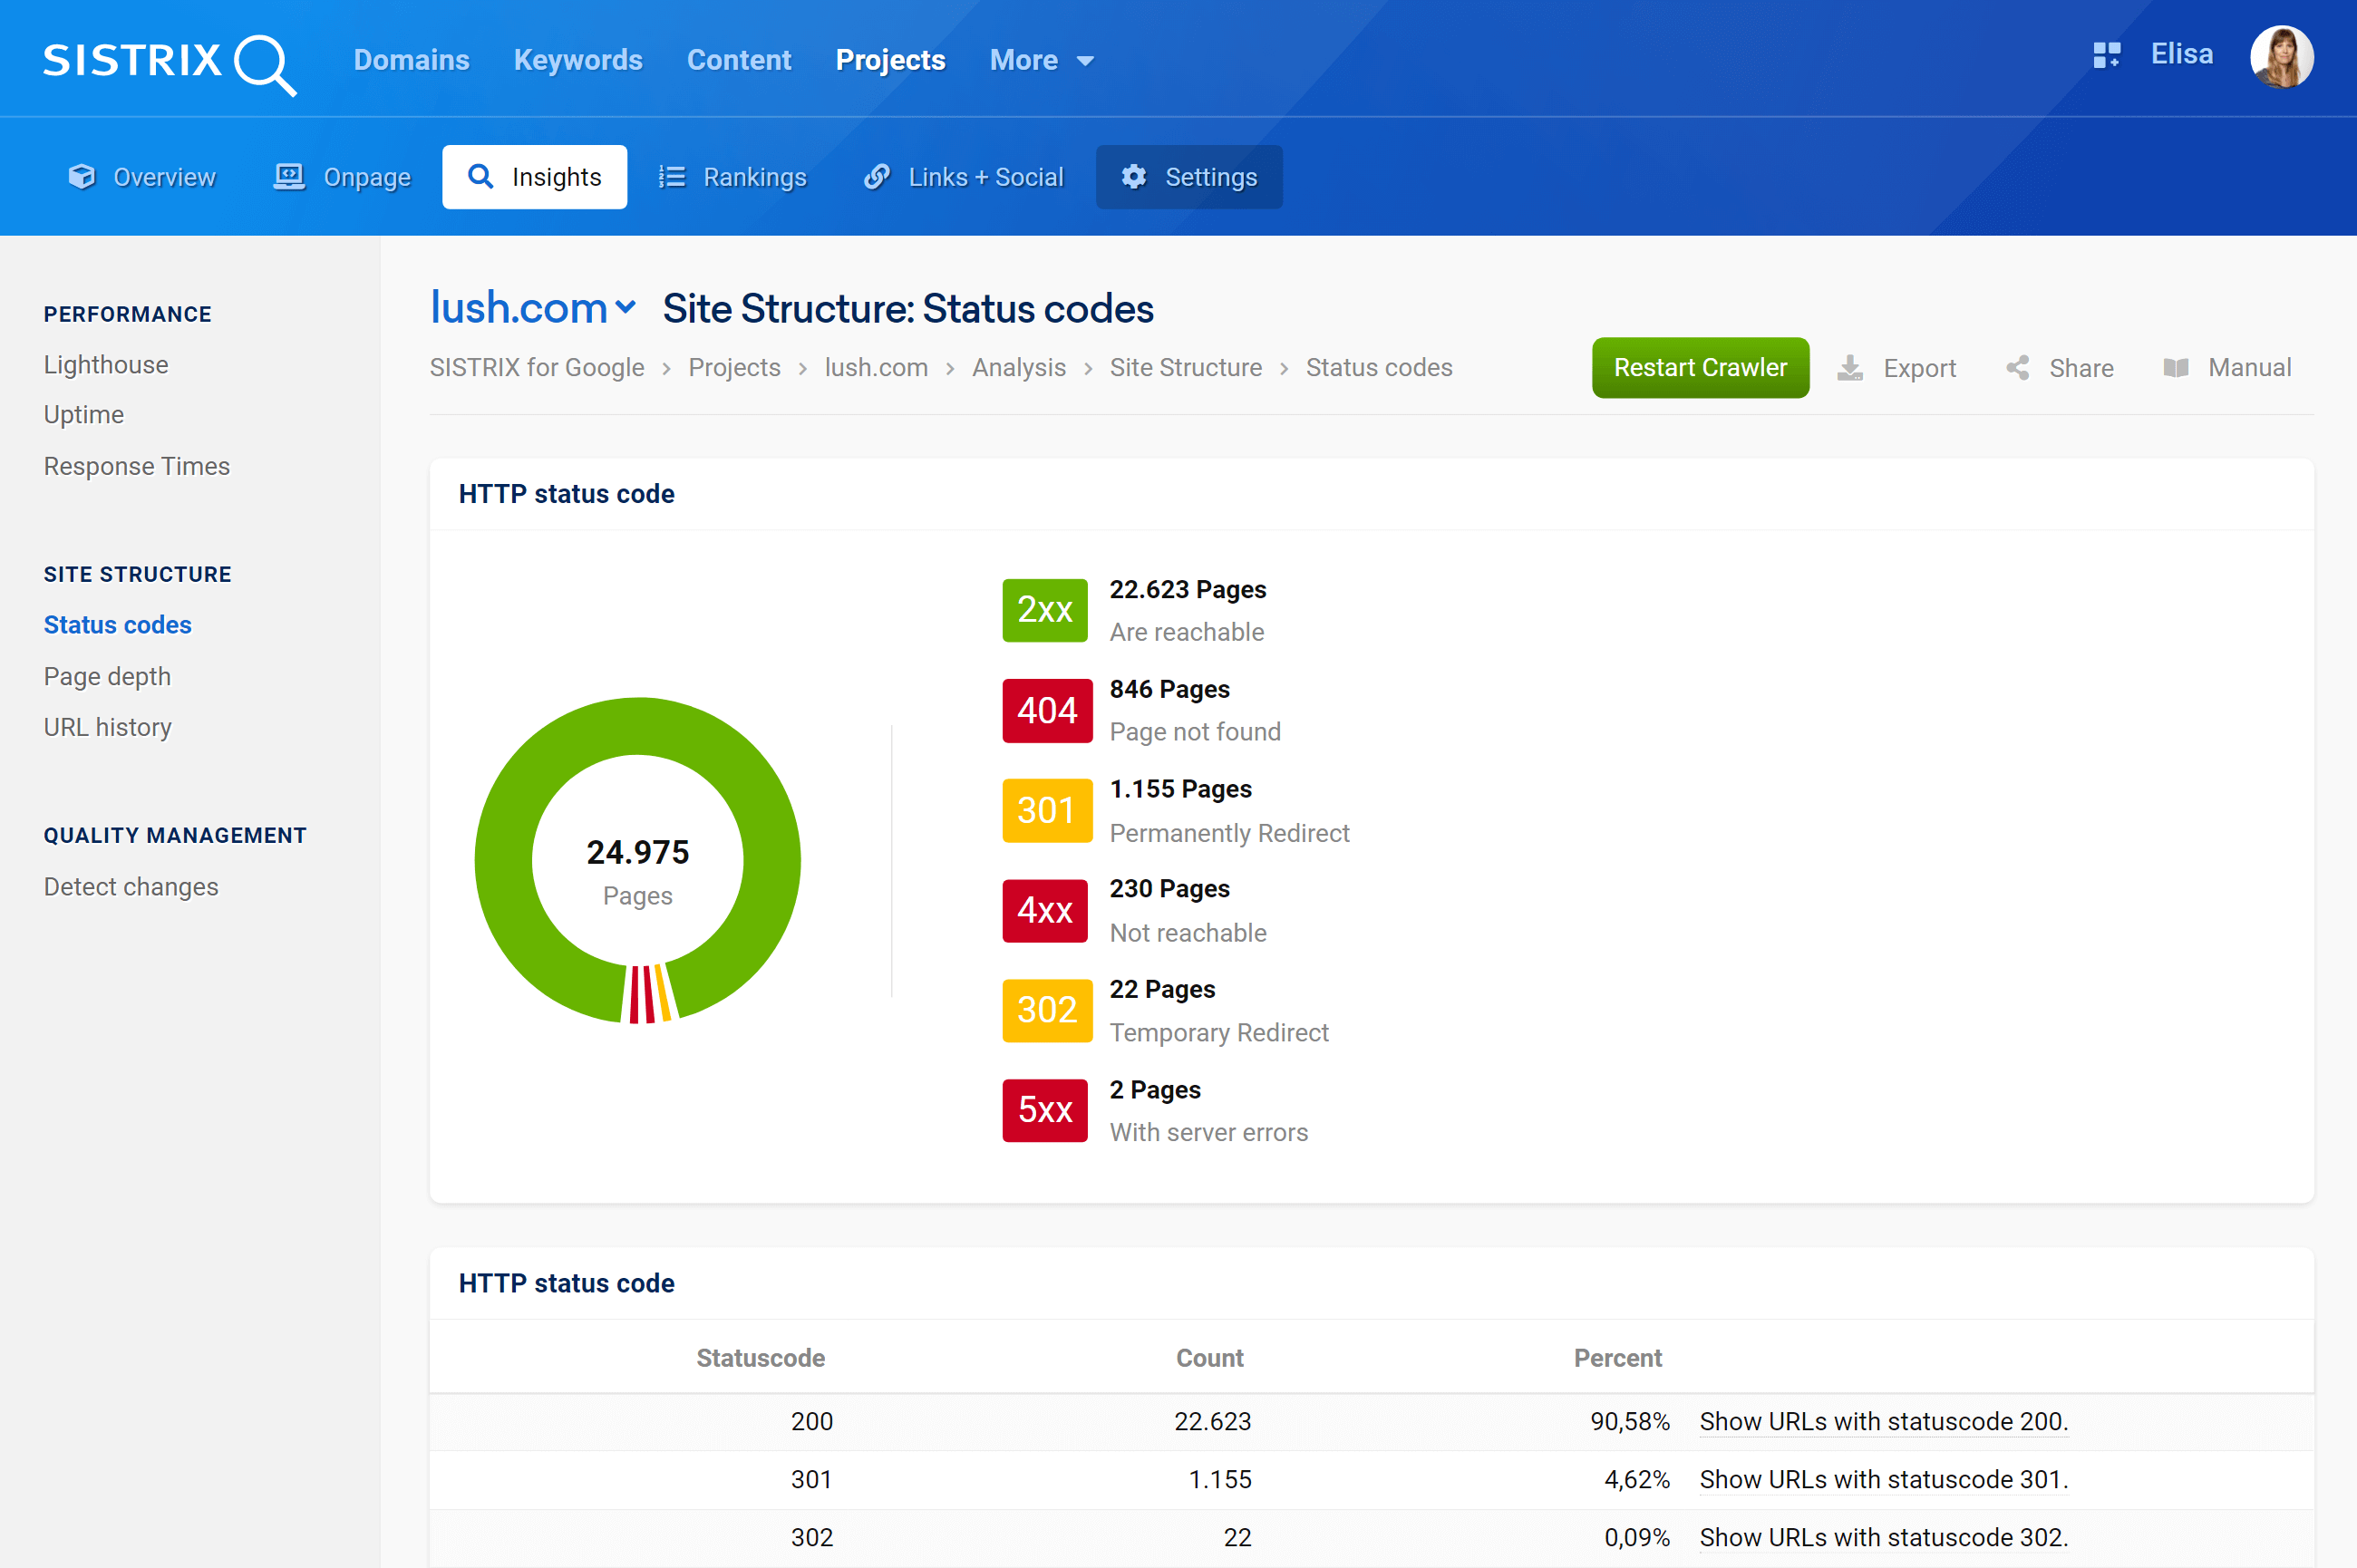 The feature "Status Codes" in the SISTRIX Optimizer